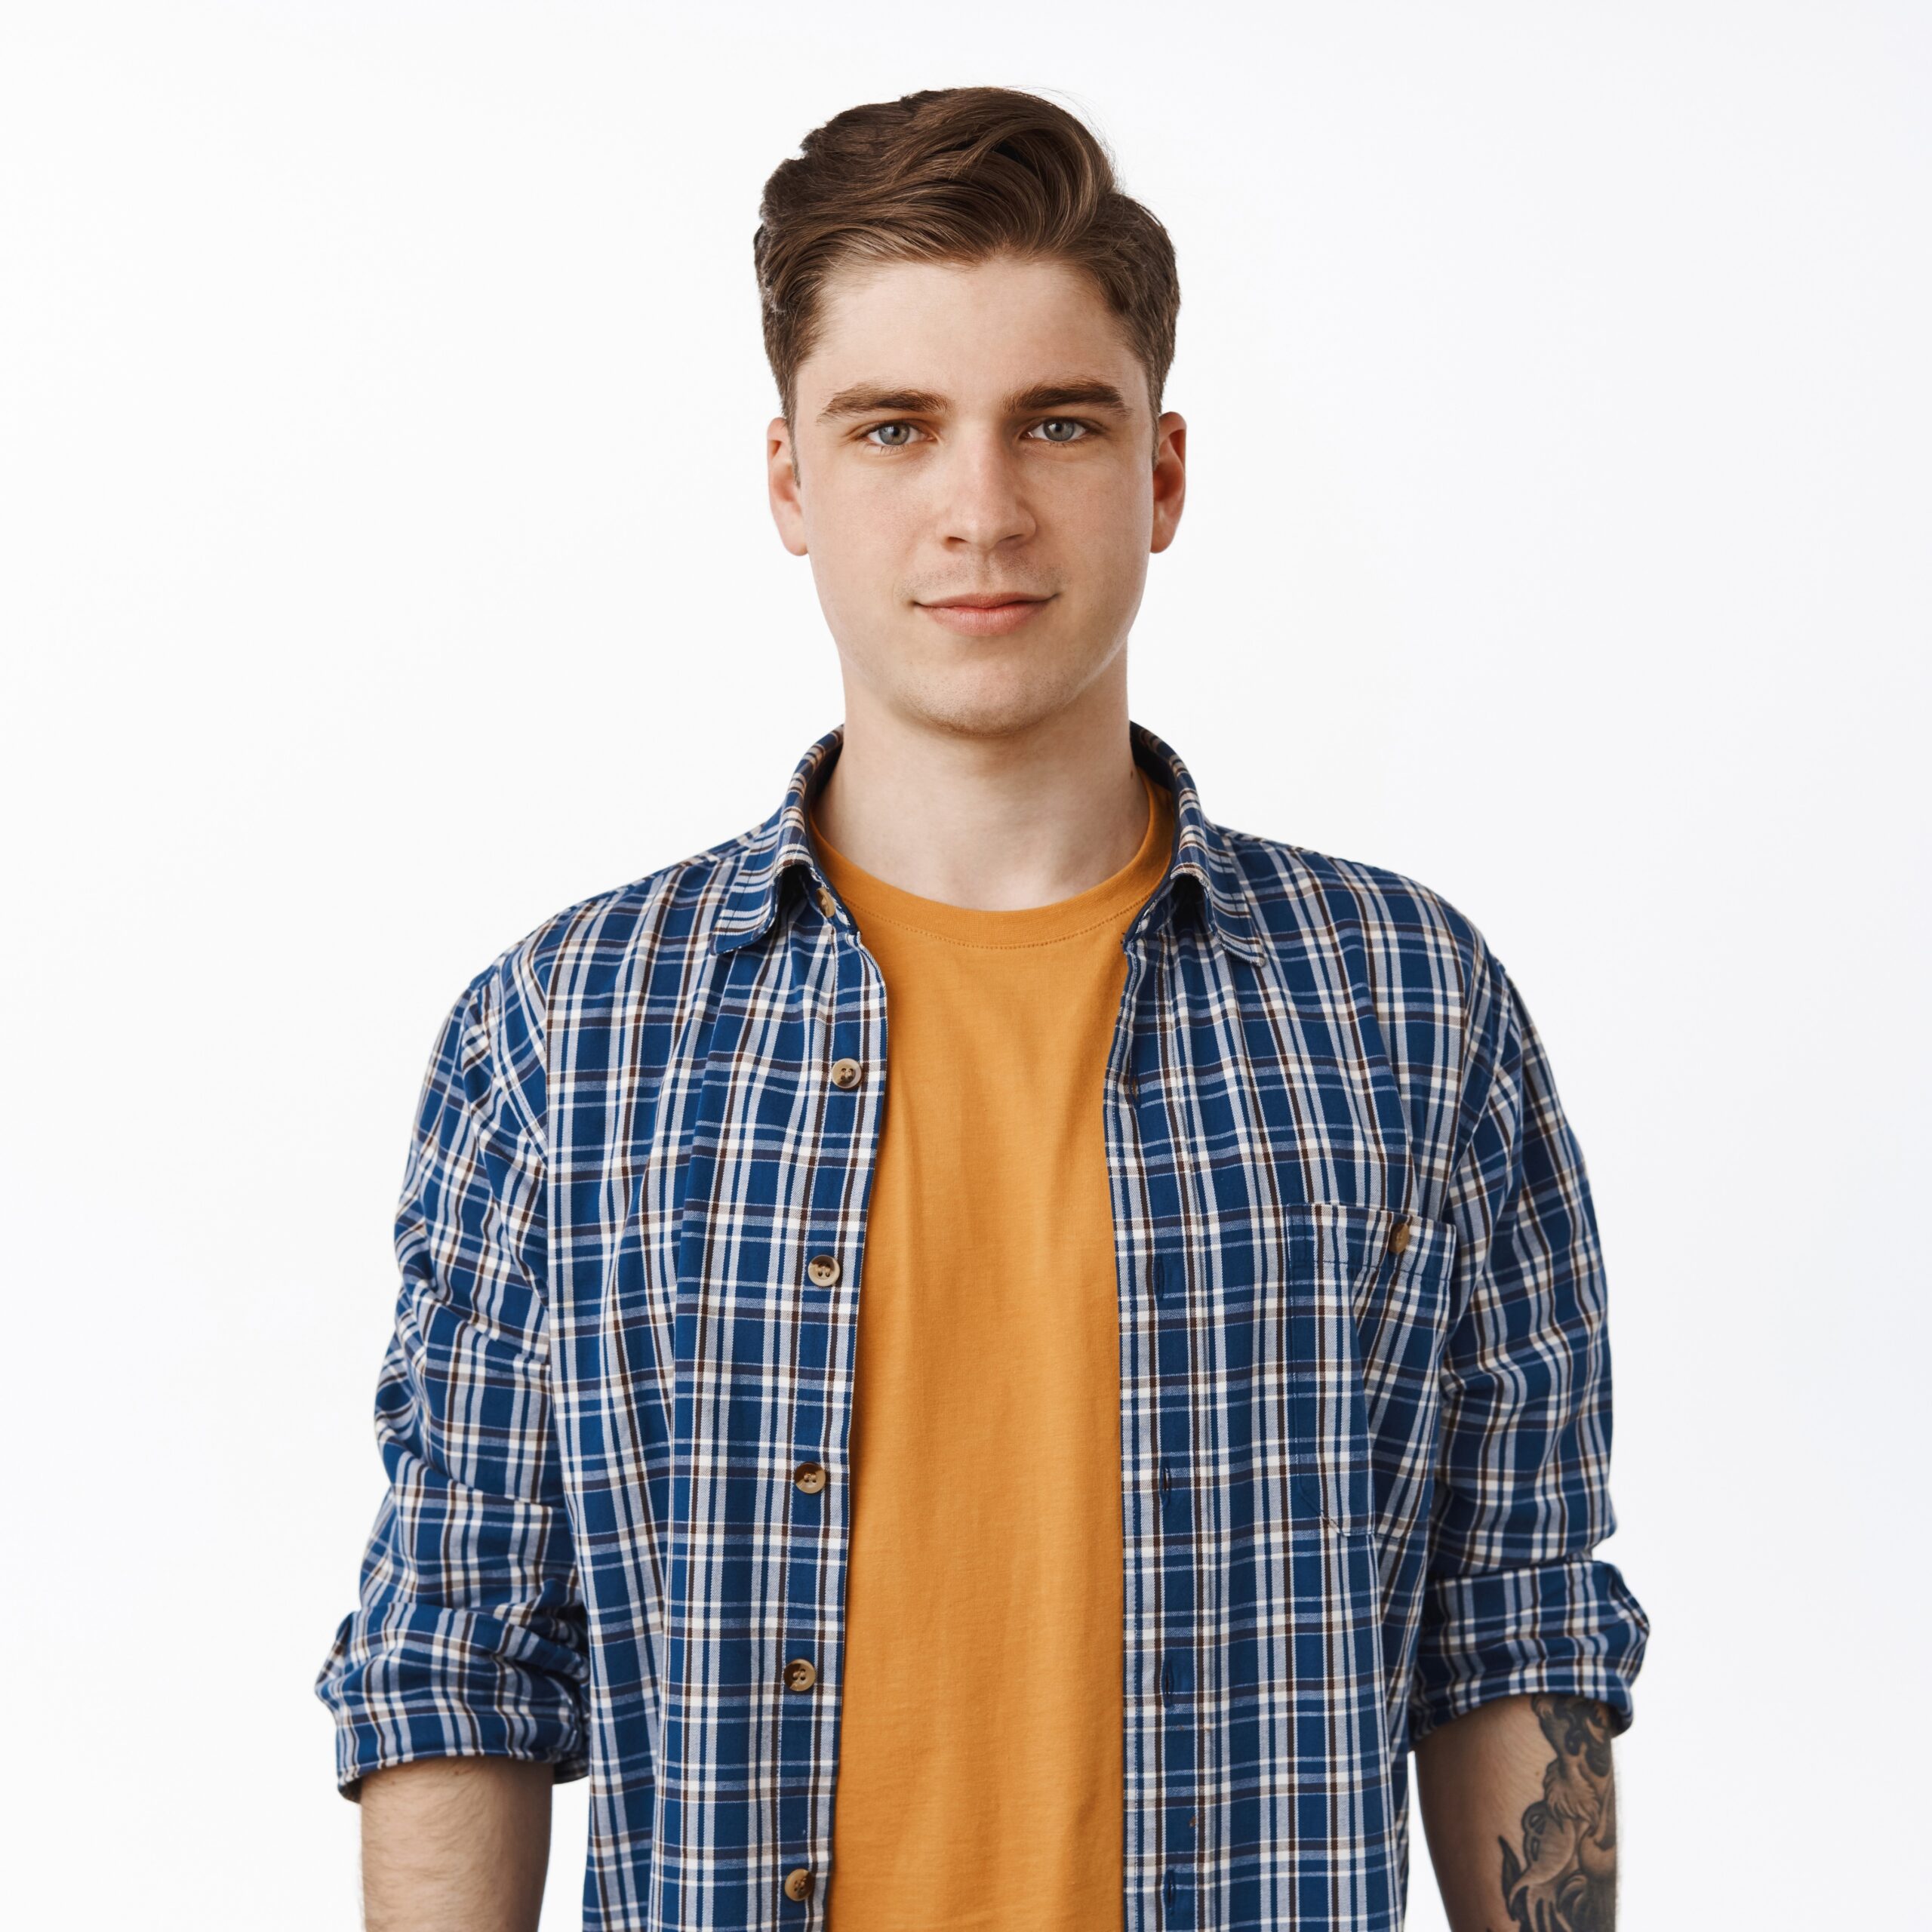 Portrait of young candid man, student boy with clean face, relaxed facial expression and casual smile, checked shirt over t-shirt, summer outfit look, white background.